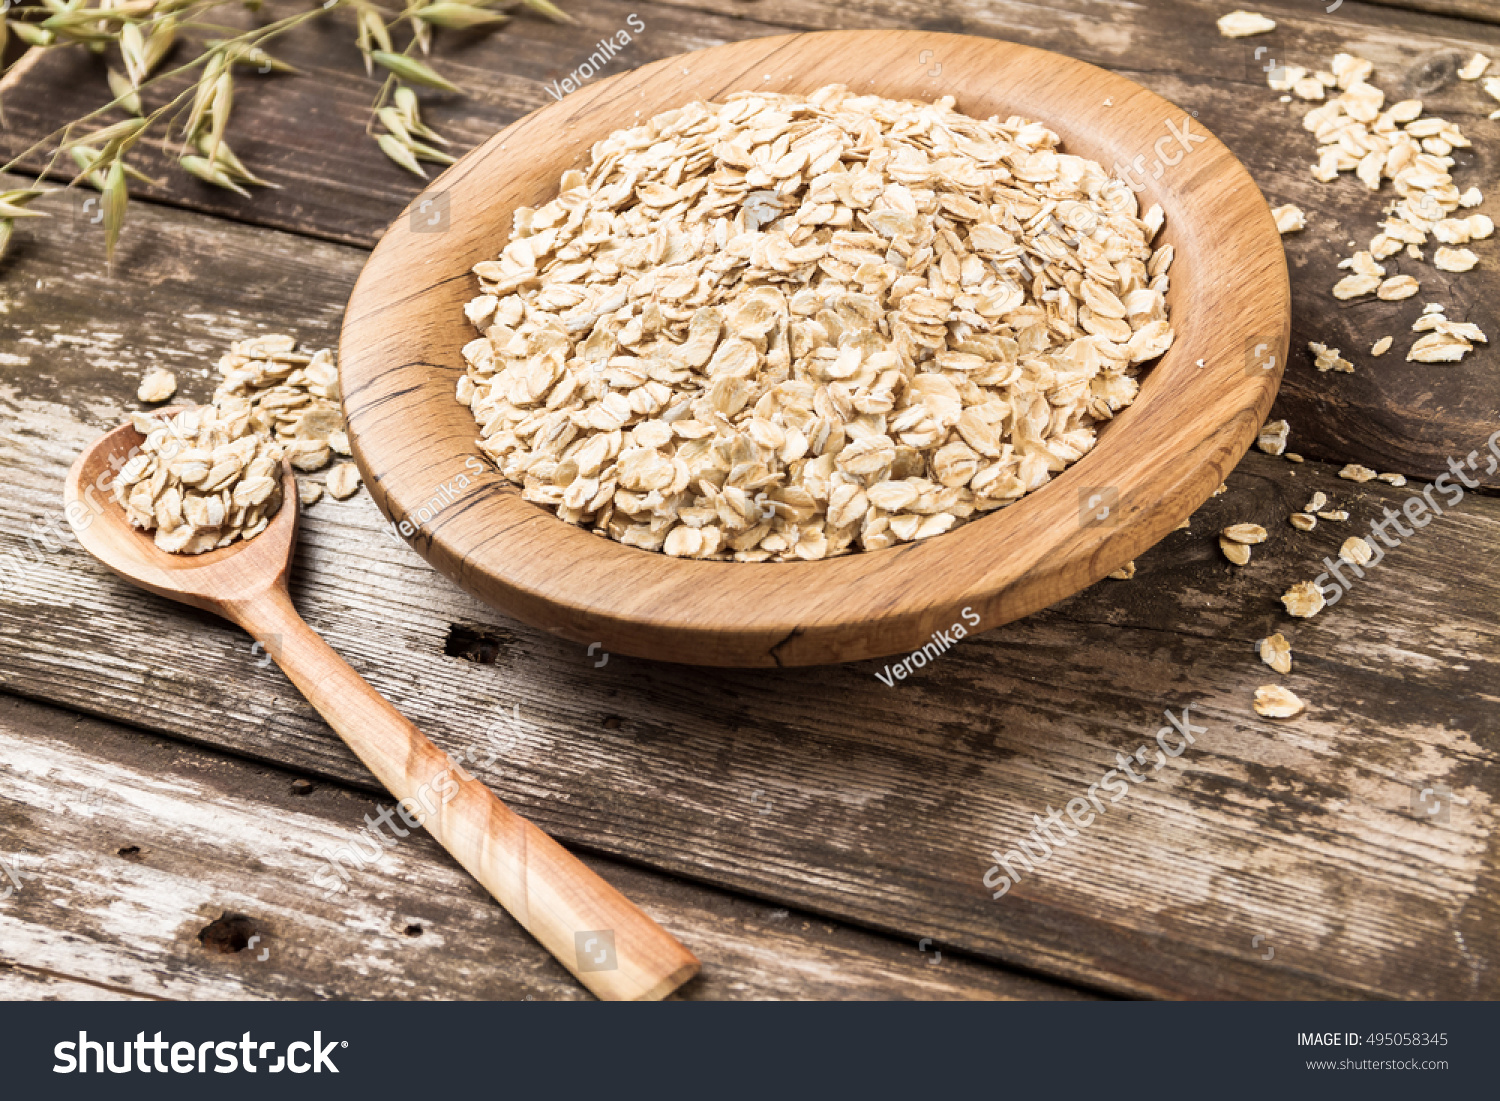 Organic oat flakes on a wooden plate. #495058345